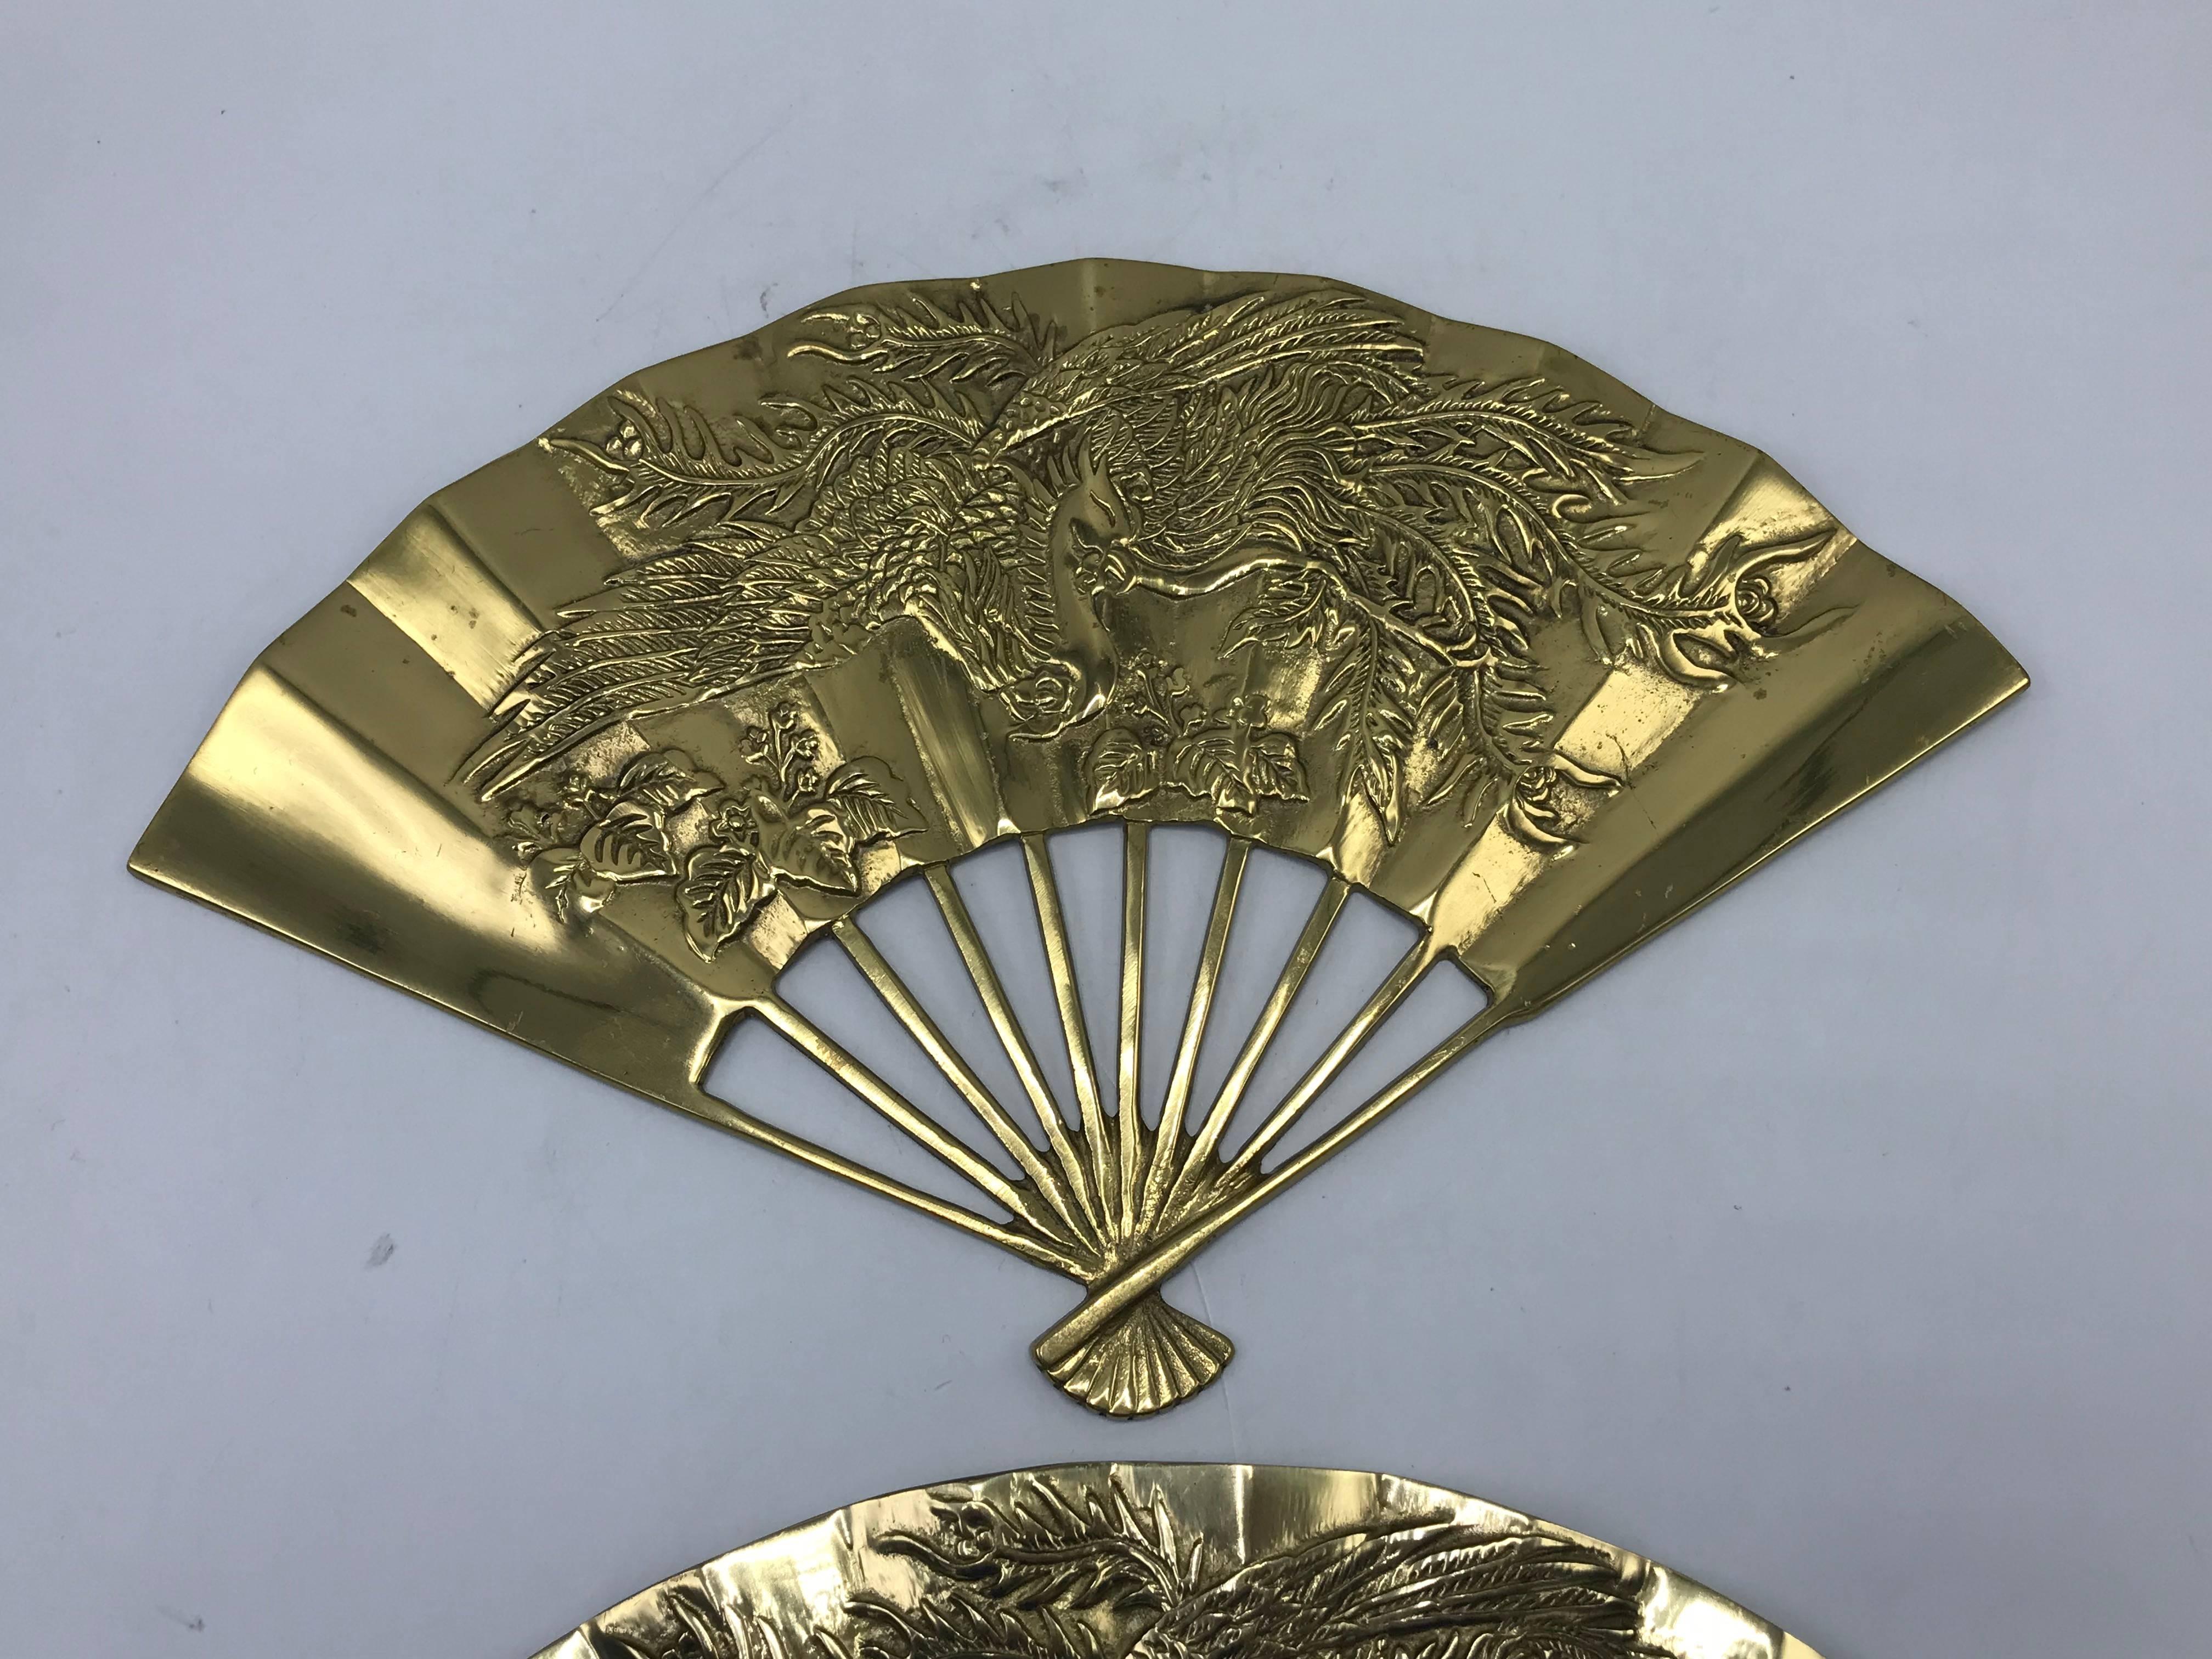 Listed is a gorgeous, pair of 1960s solid-brass chinoiserie wall sculptures in the shape of hand-fans. Each have matching, ornate dragon motifs. Wall hooks on backside for easy hanging. Heavy.